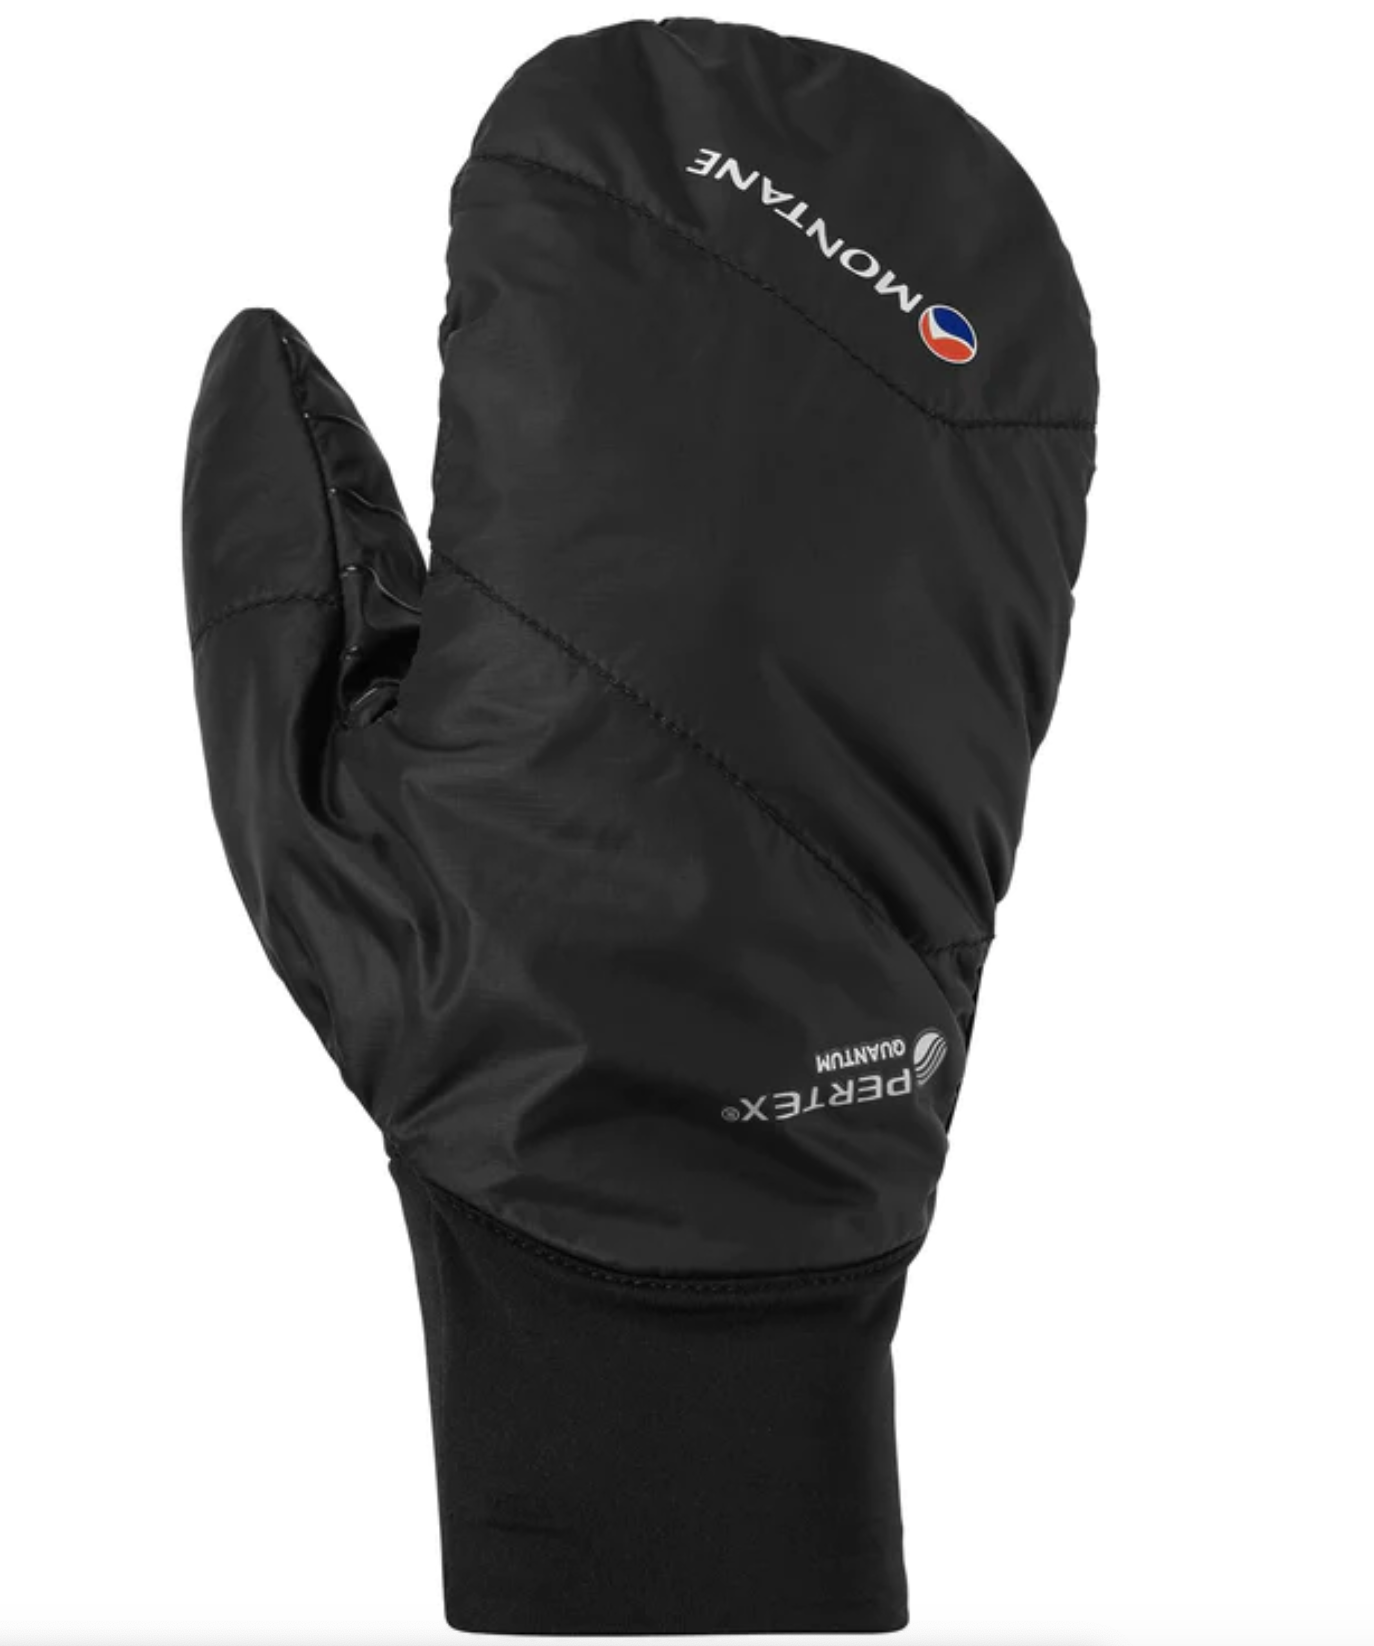 Montane Switch Gloves